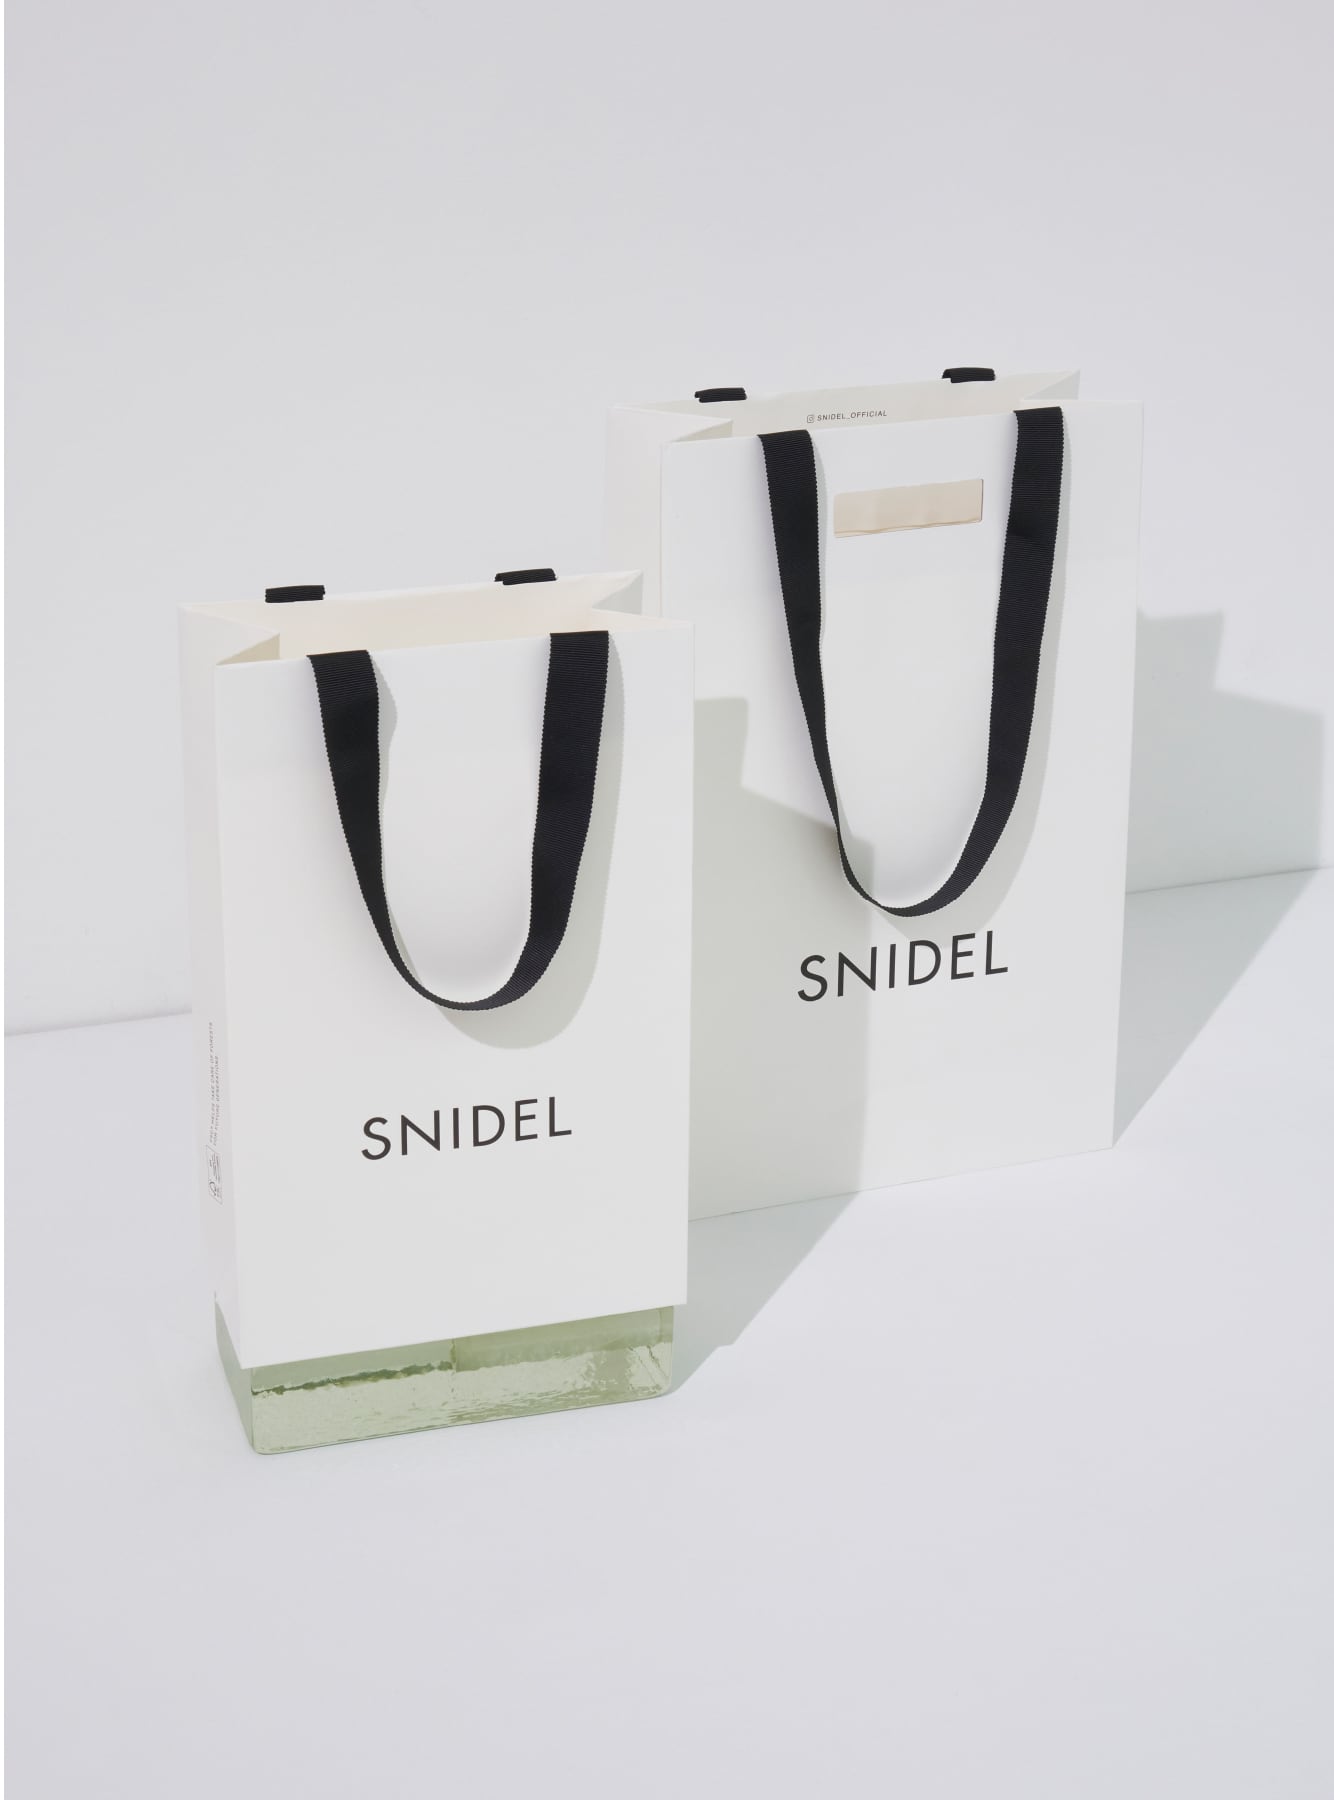 SNIDEL FOR SUSTAINABILITY │ SNIDEL（スナイデル）公式サイト